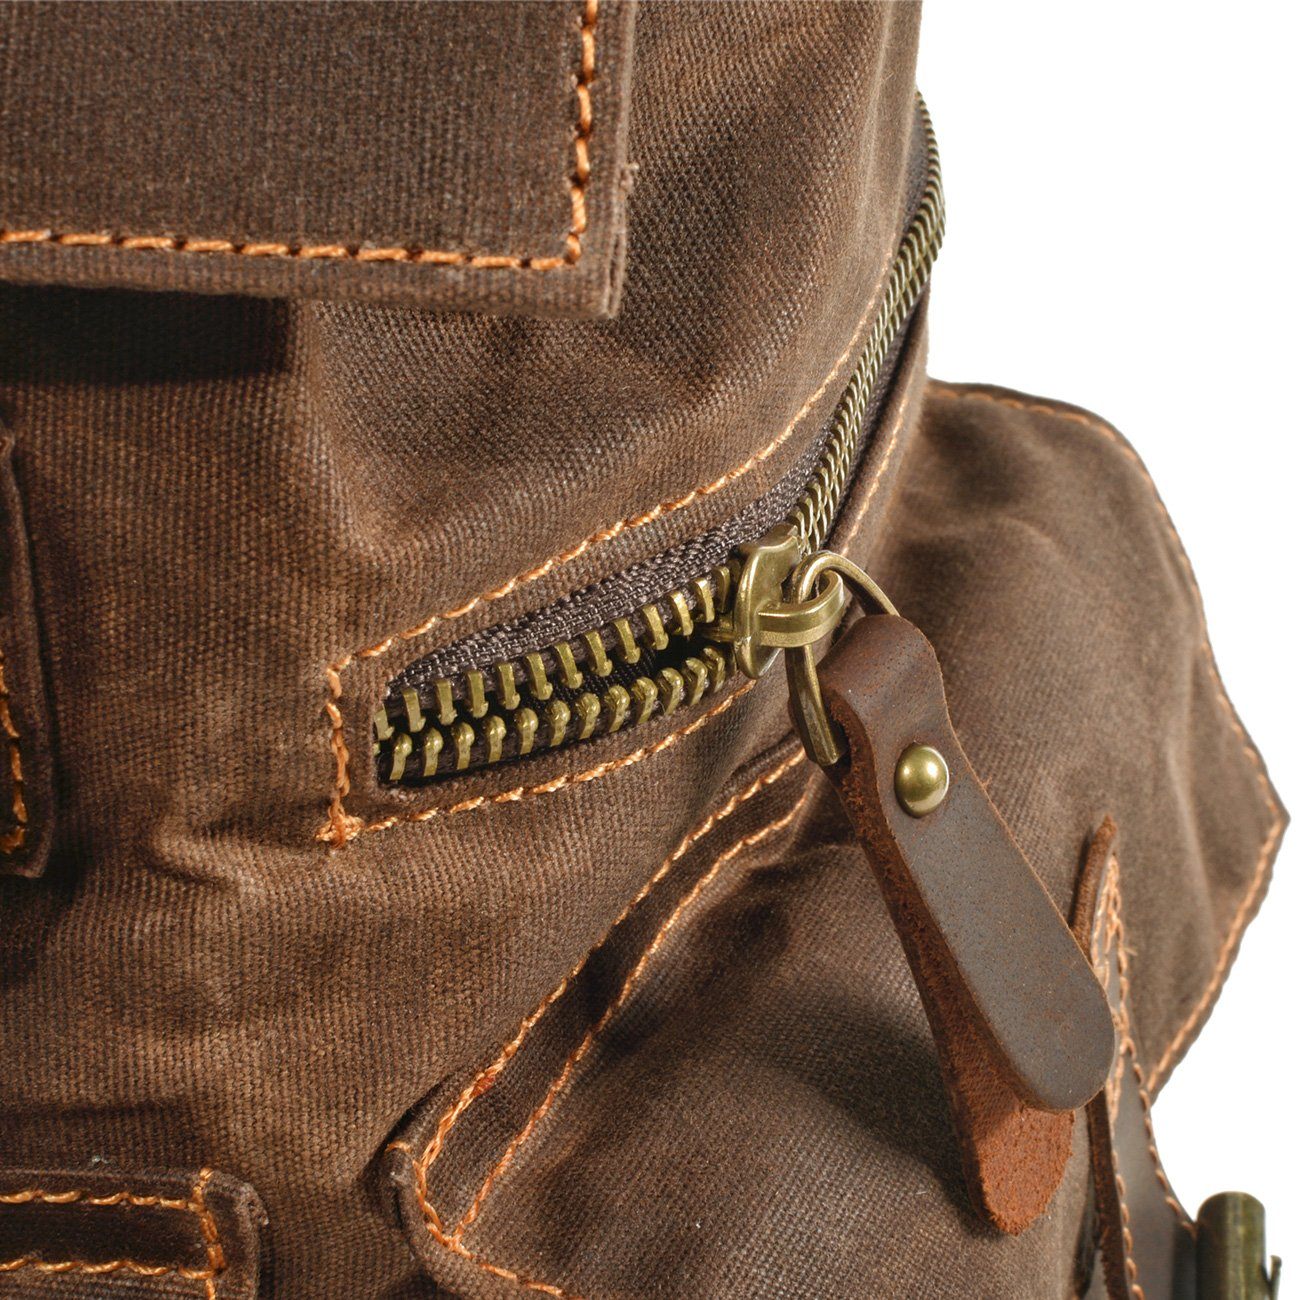 Waxed Canvas Backpack Rucksack 30L - Large Capacity, Genuine Leather,  Waterproof, Anti-theft - Hiking, Bushcraft – PaCanva